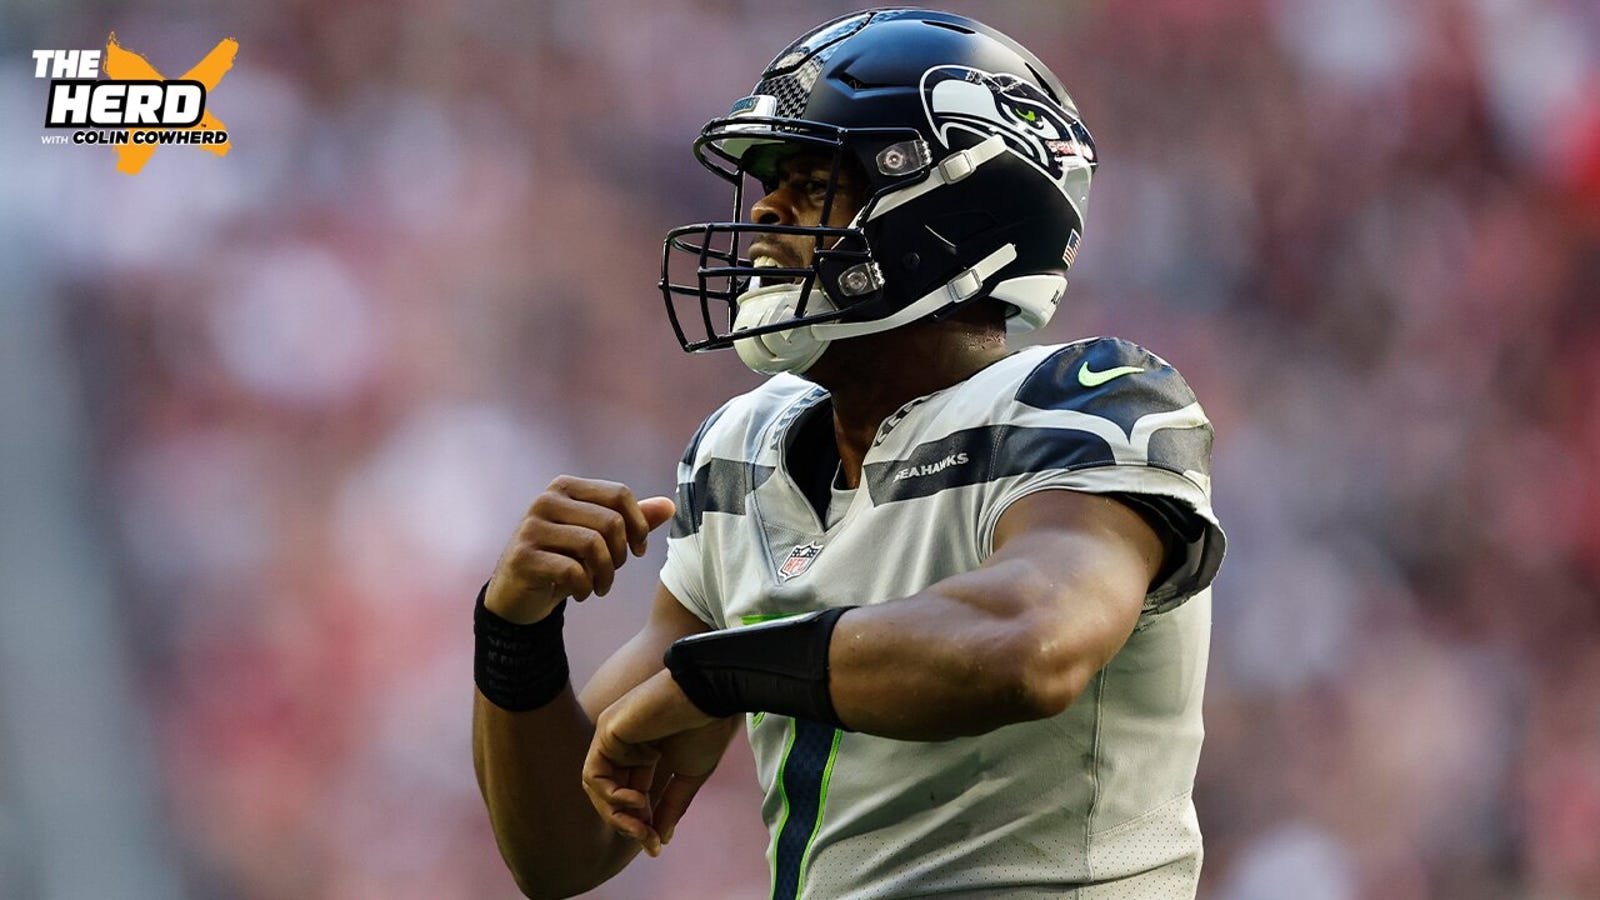 What has made Geno Smith, Seahawks successful